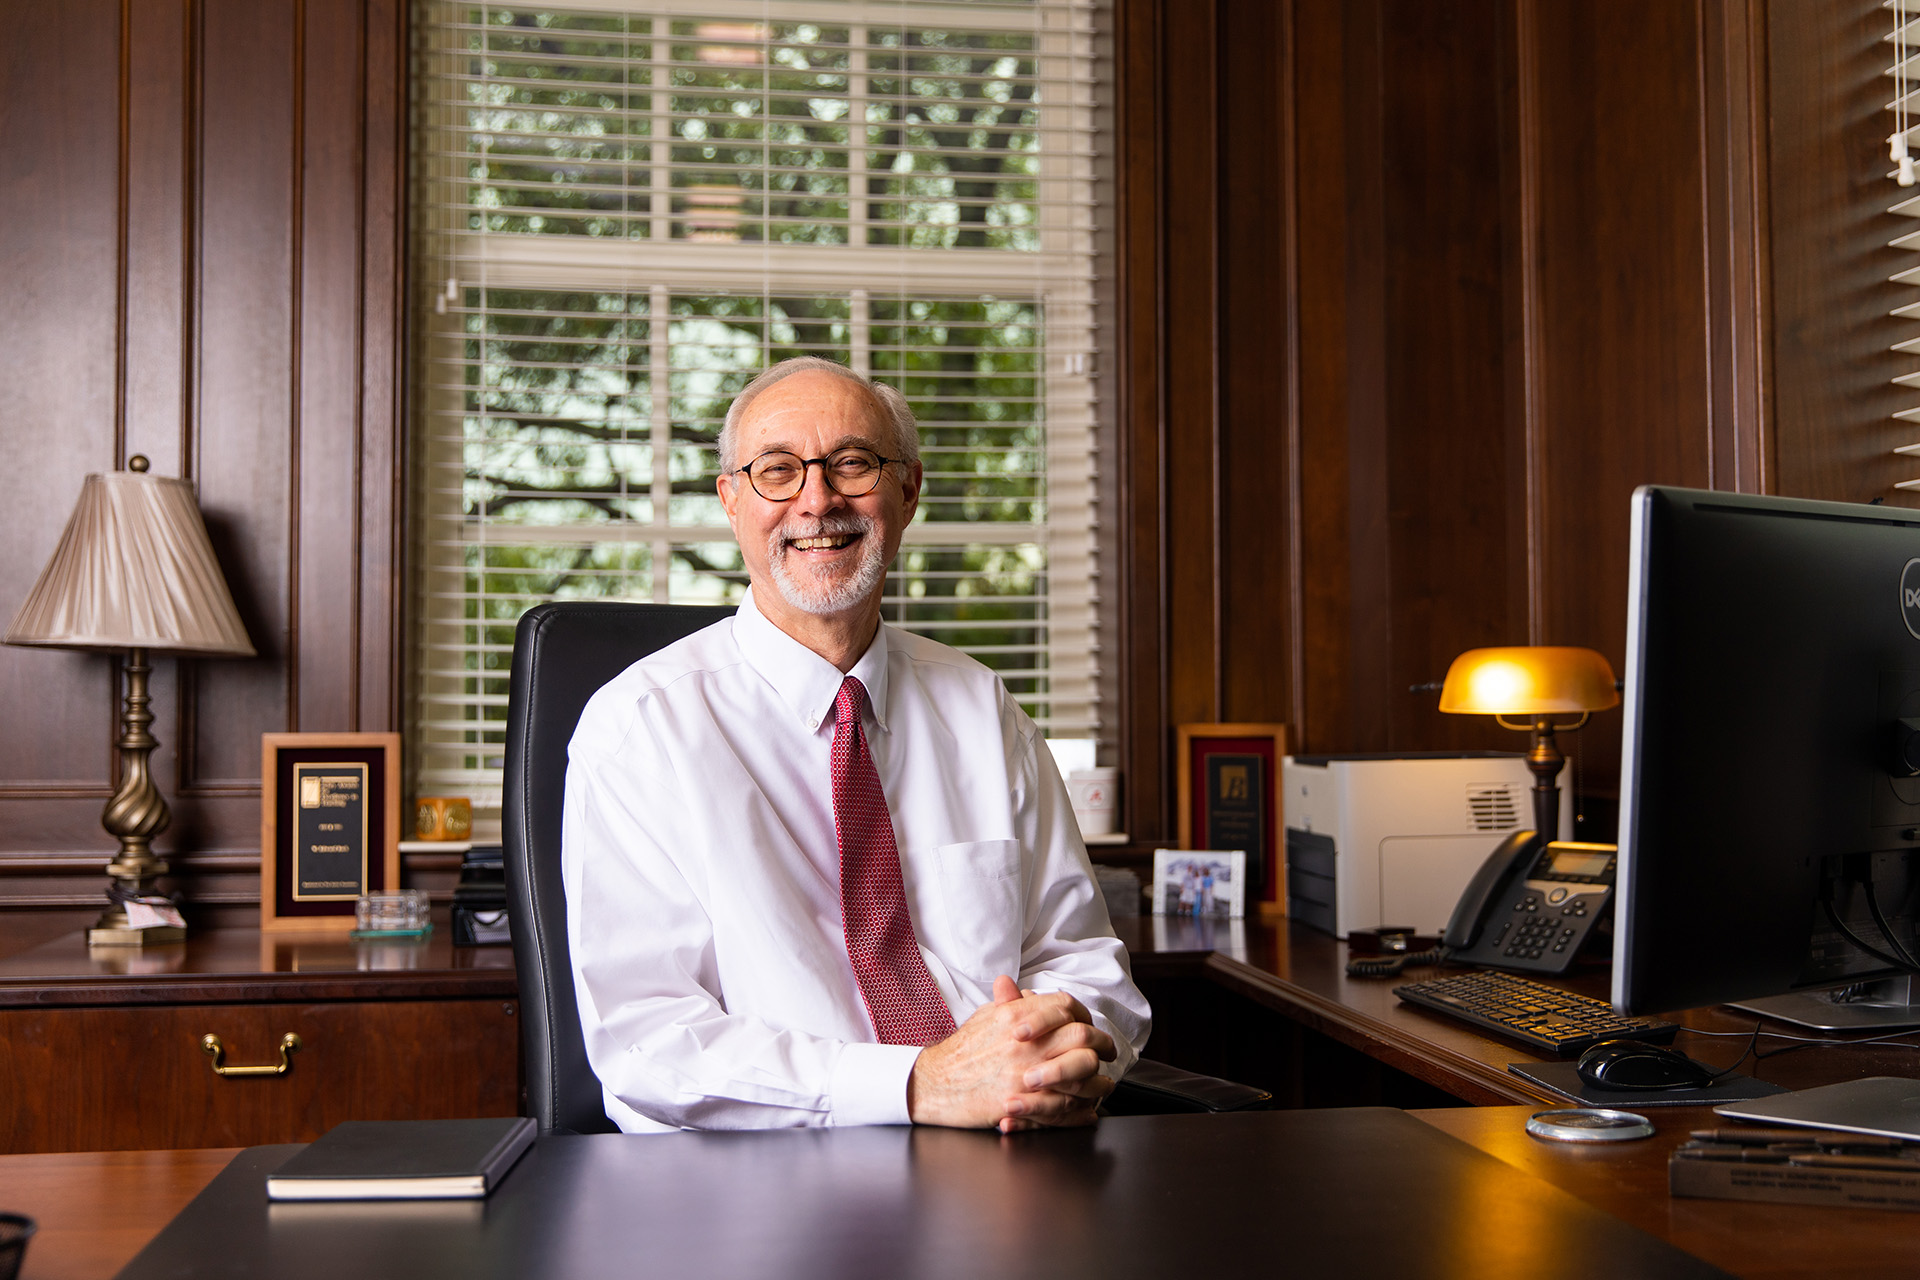 Link to Instagram, Instagram pic of the new interim dean Back